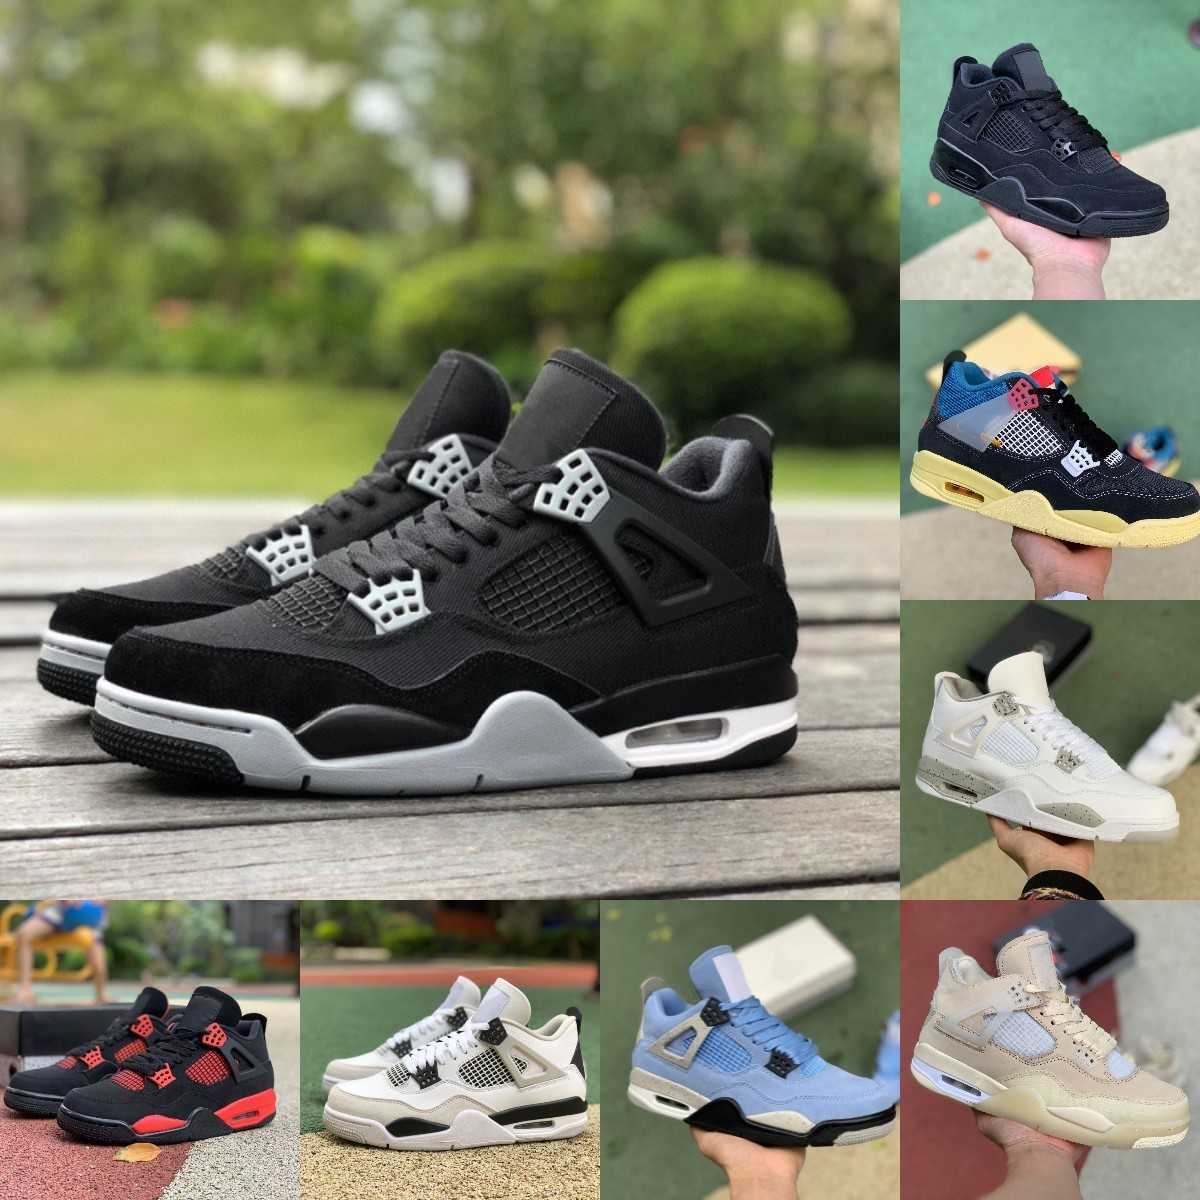 

2023 Jumpman Black Canvas 4 4s Basketball Shoes University Blue Mens Military Cement Cat Cream Sail White Oreo Infrared Canyon Purple Court, Military black